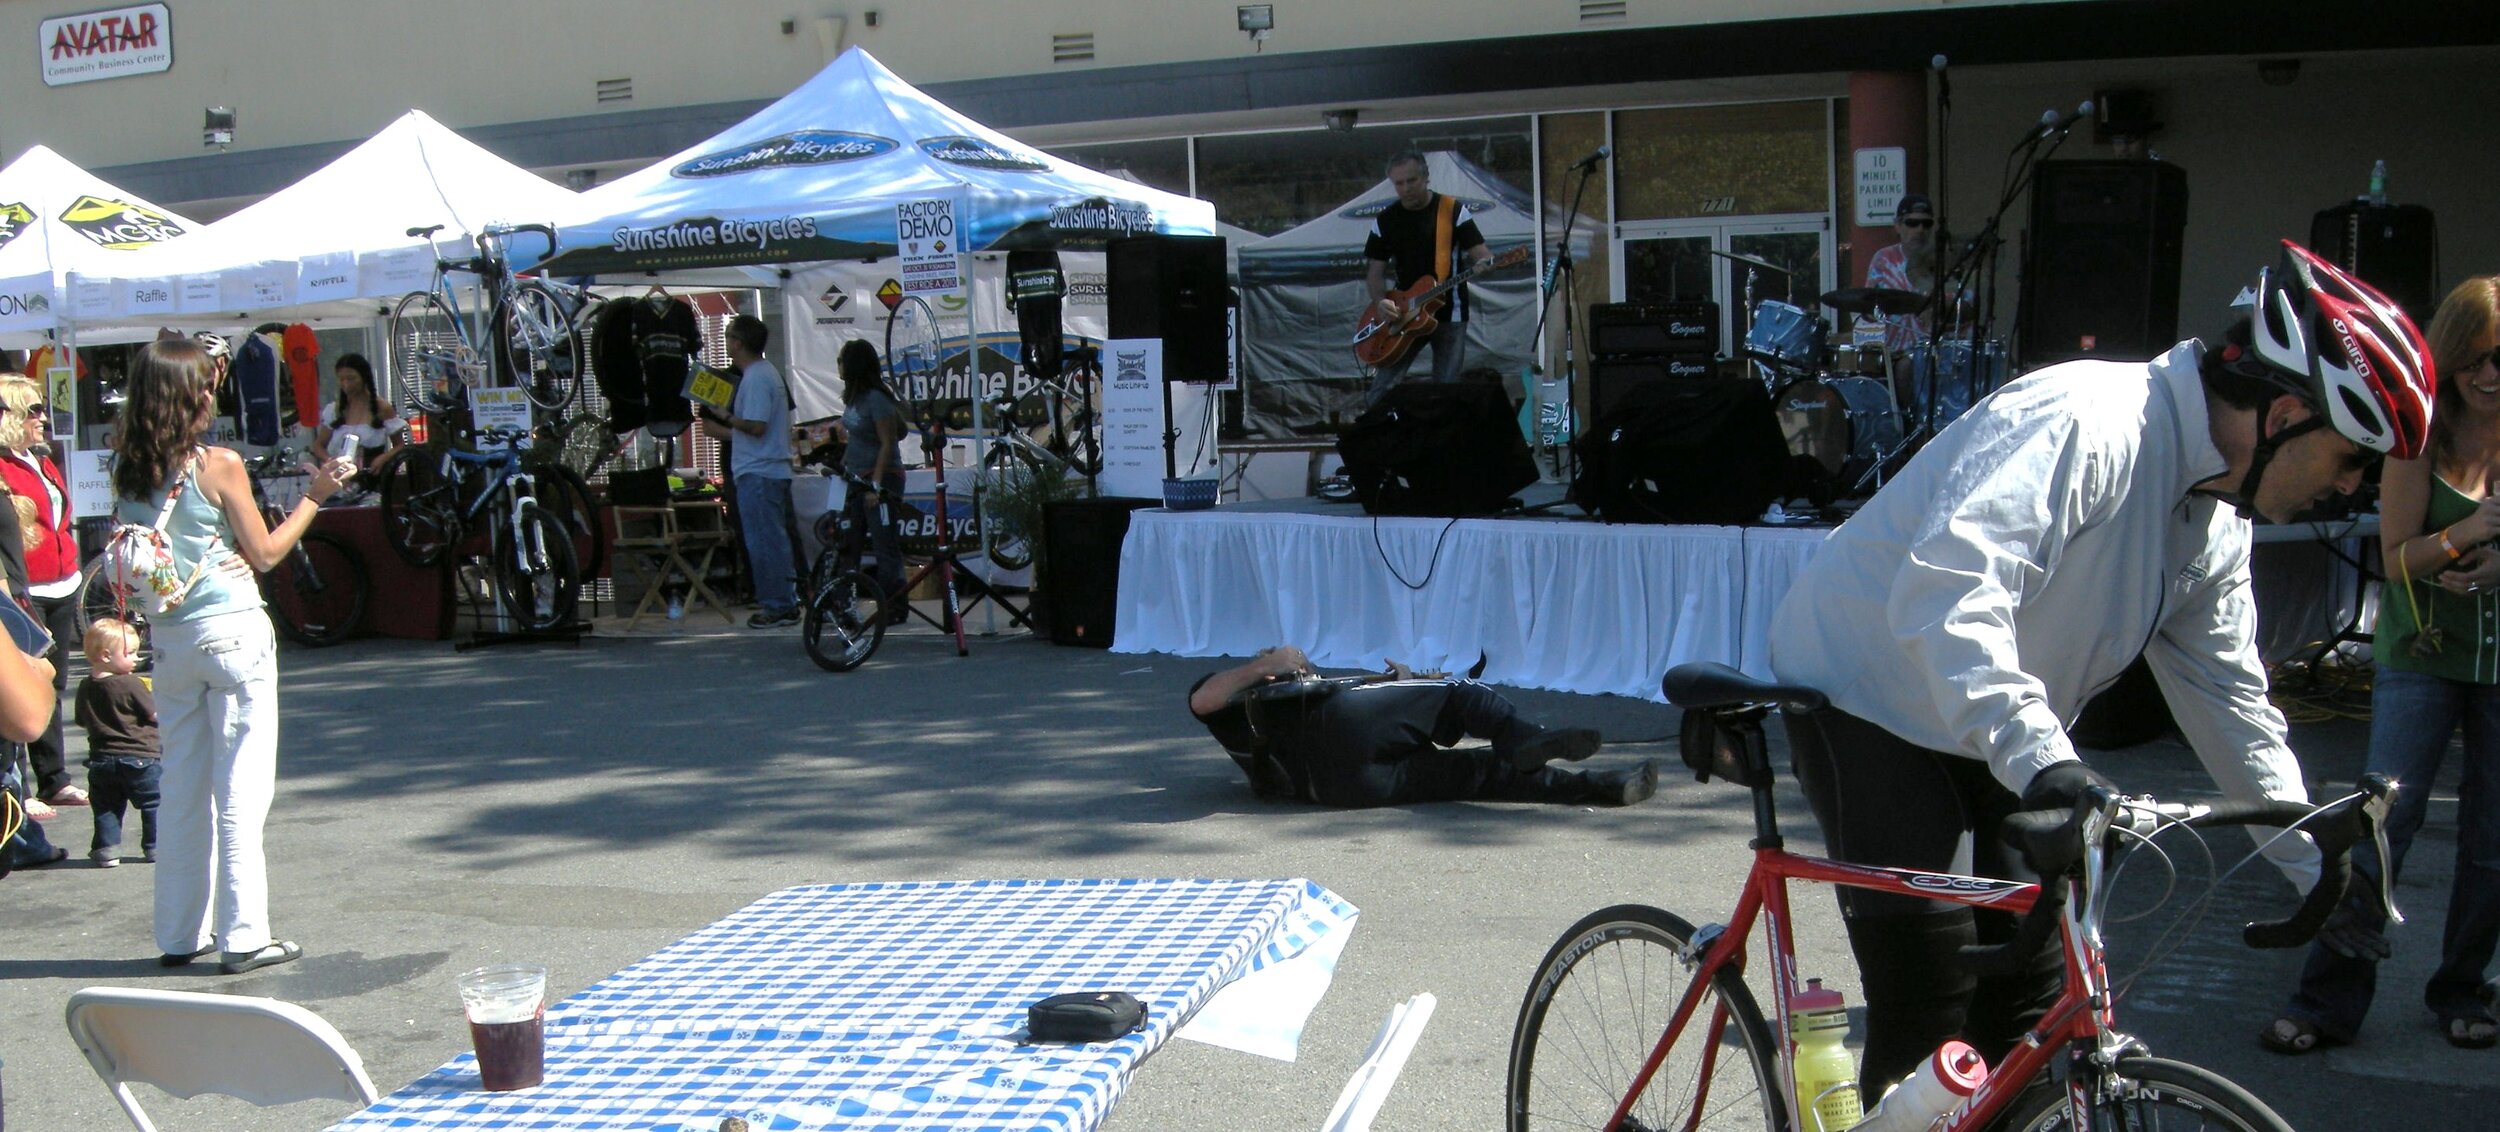 Or at the Marin County Bicycle Coalition sponsored Biketoberfest in Fairfax, CA.